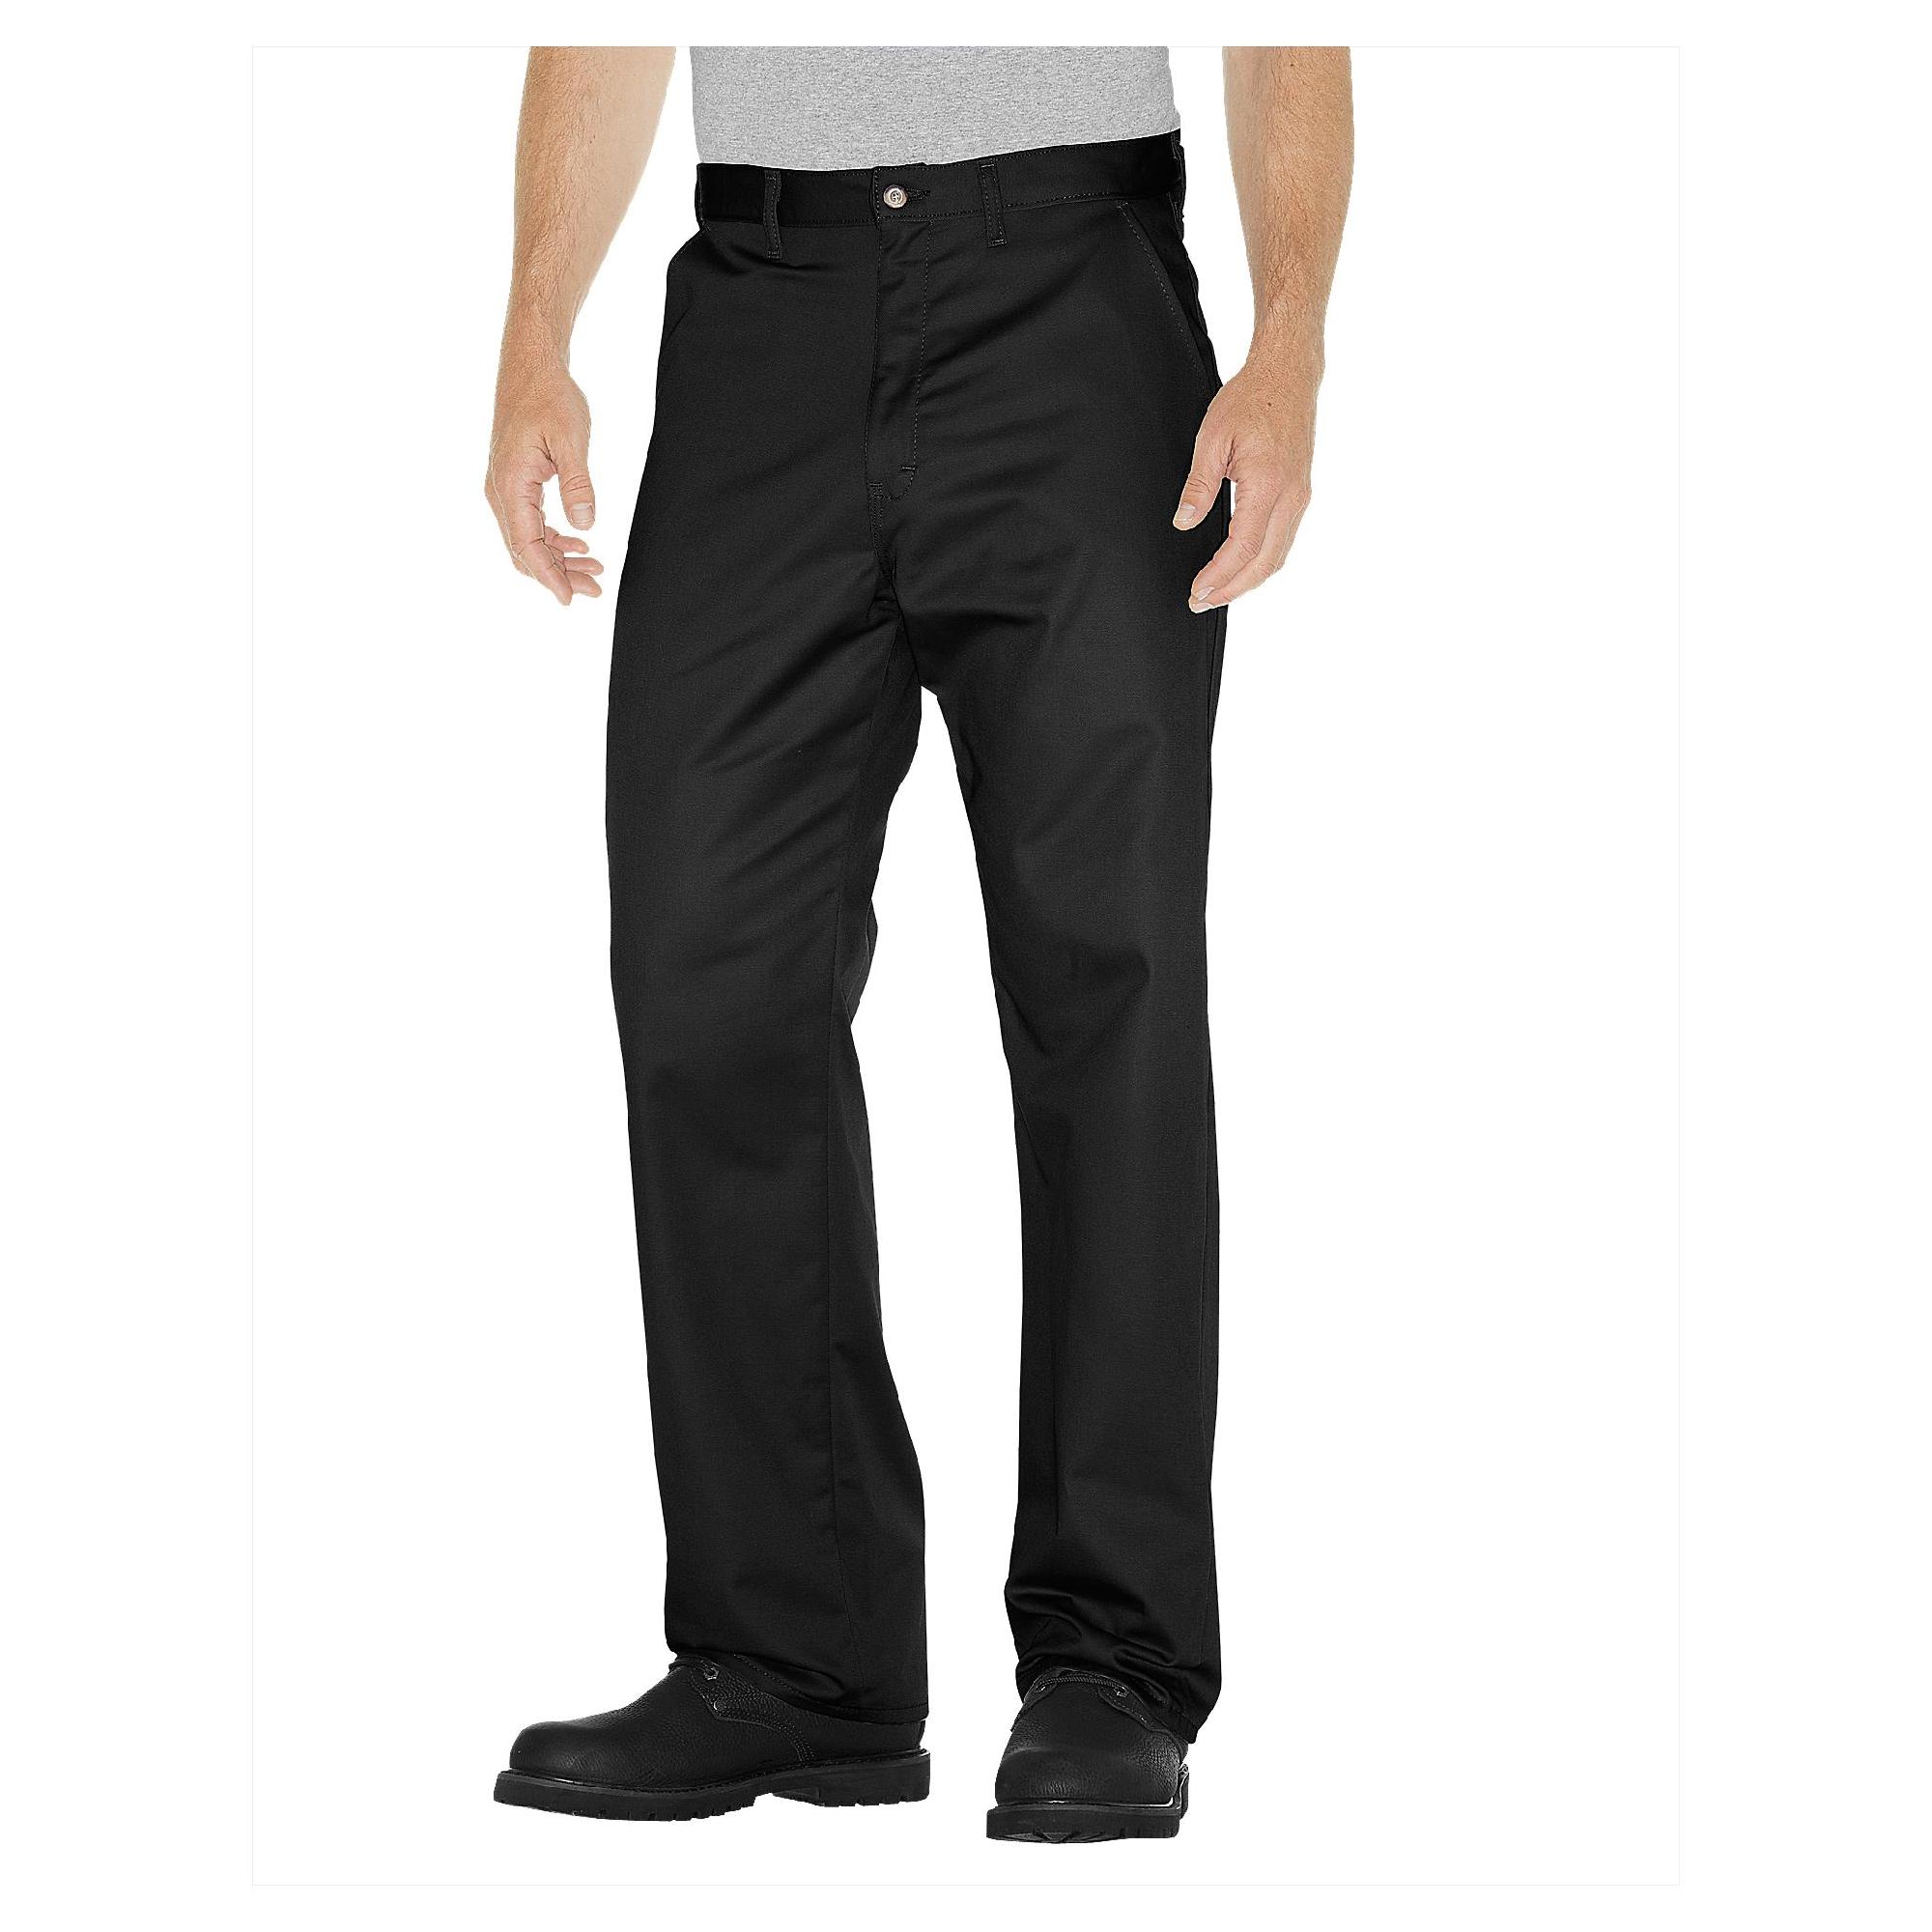 dickies-men-s-relaxed-fit-cotton-flat-front-pant-wp314-clothing-men-s-clothing-men-s-pants